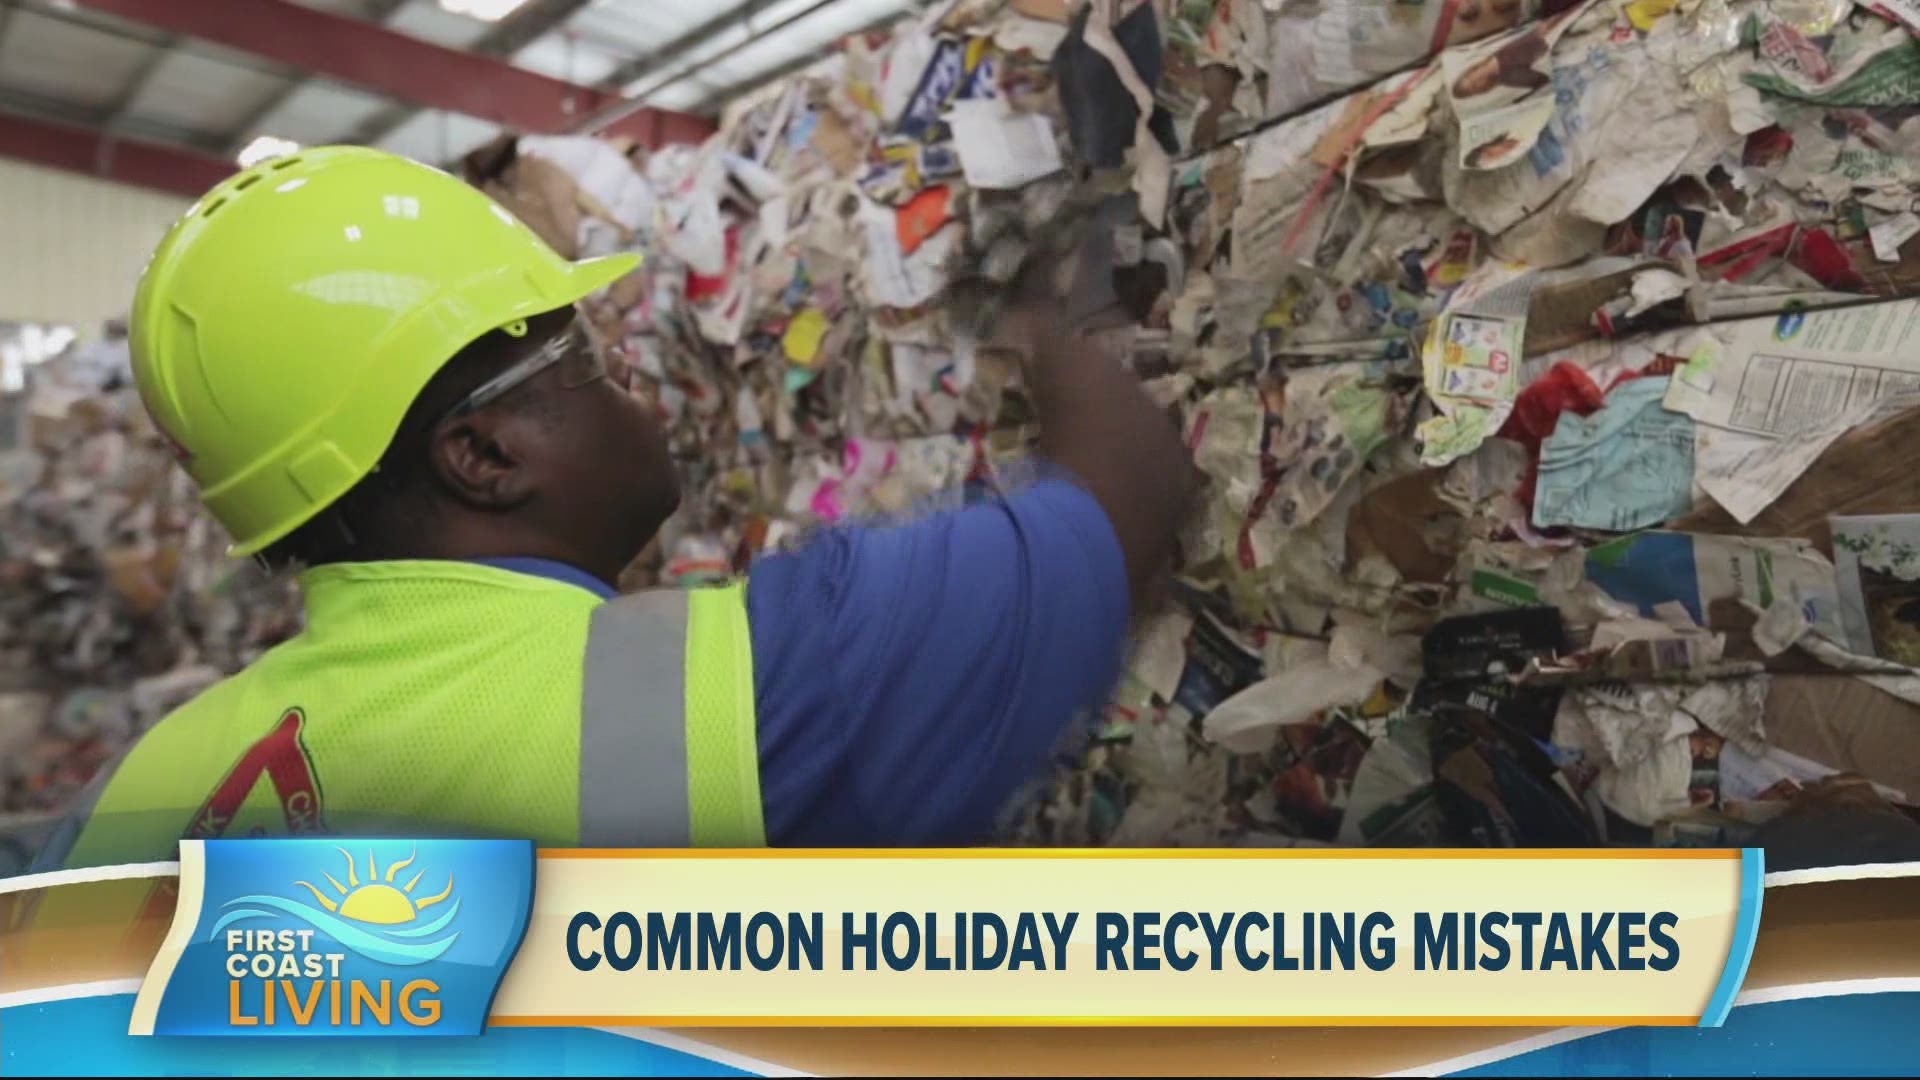 What consumers need to know to have an eco-friendly holiday season.